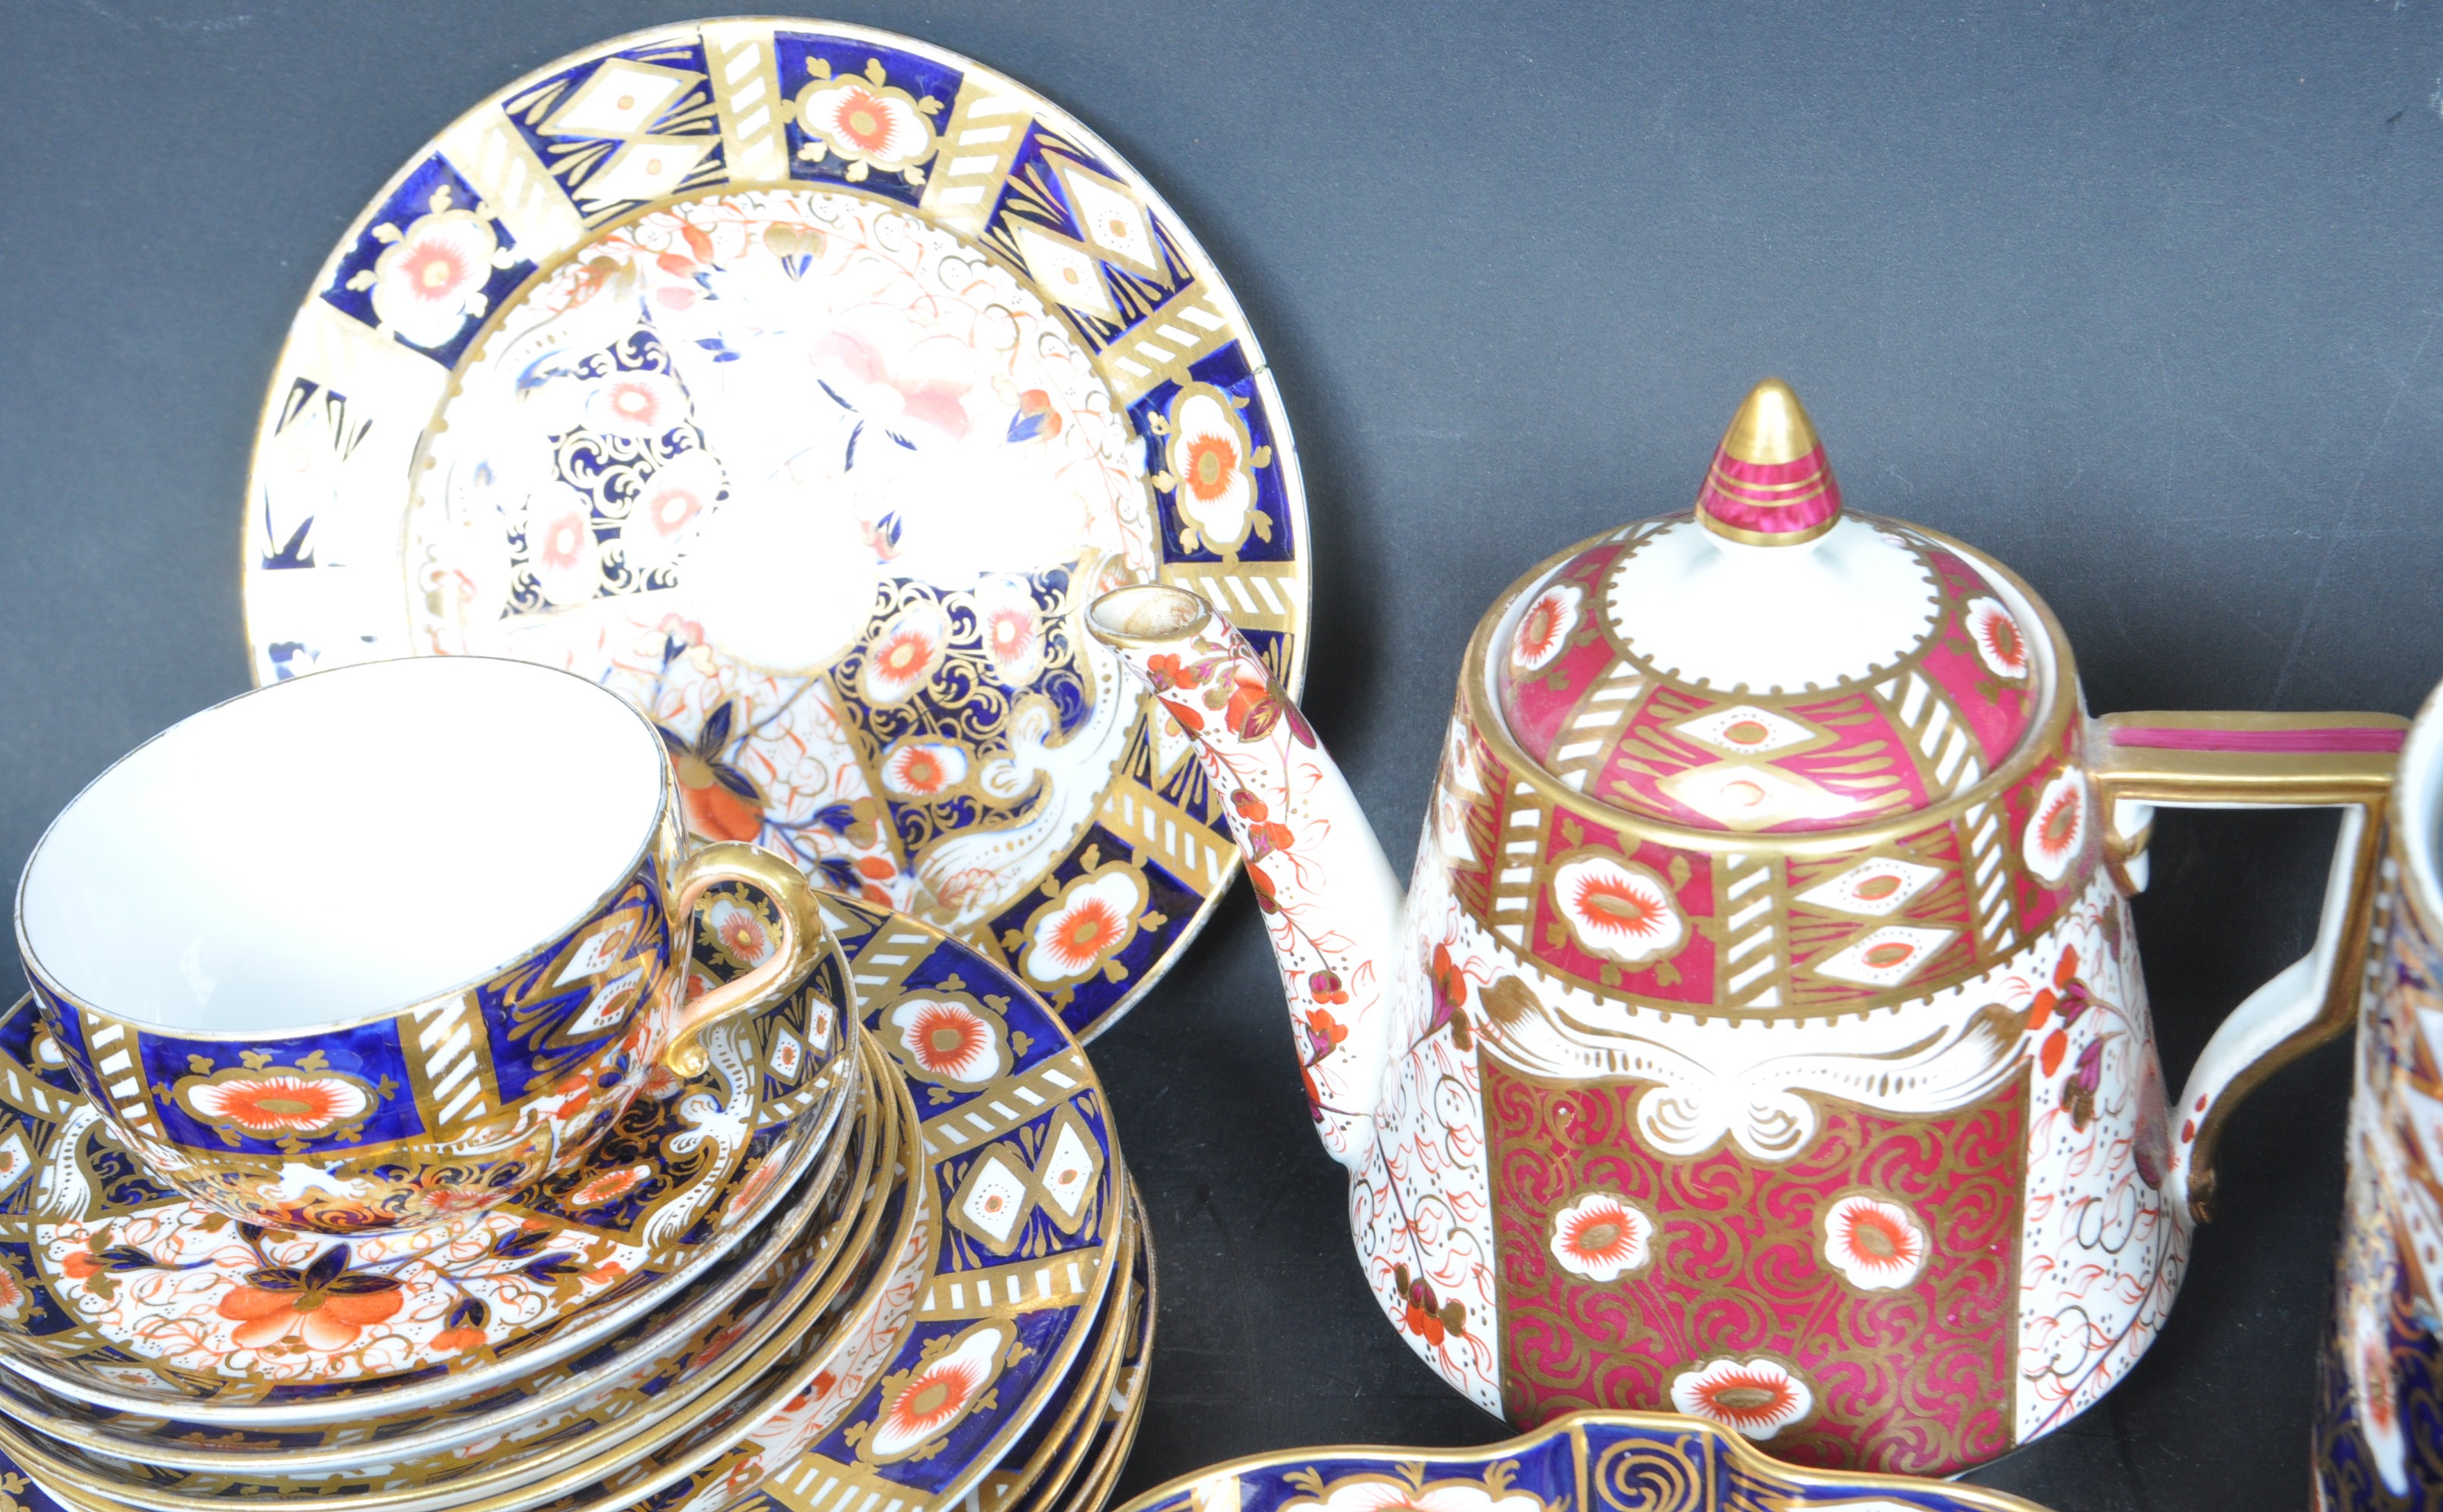 COLLECTION OF VINTAGE 20TH CENTURY ROYQL CROWN DERBY IMARI PATTERN CHINA AND MORE - Image 8 of 14